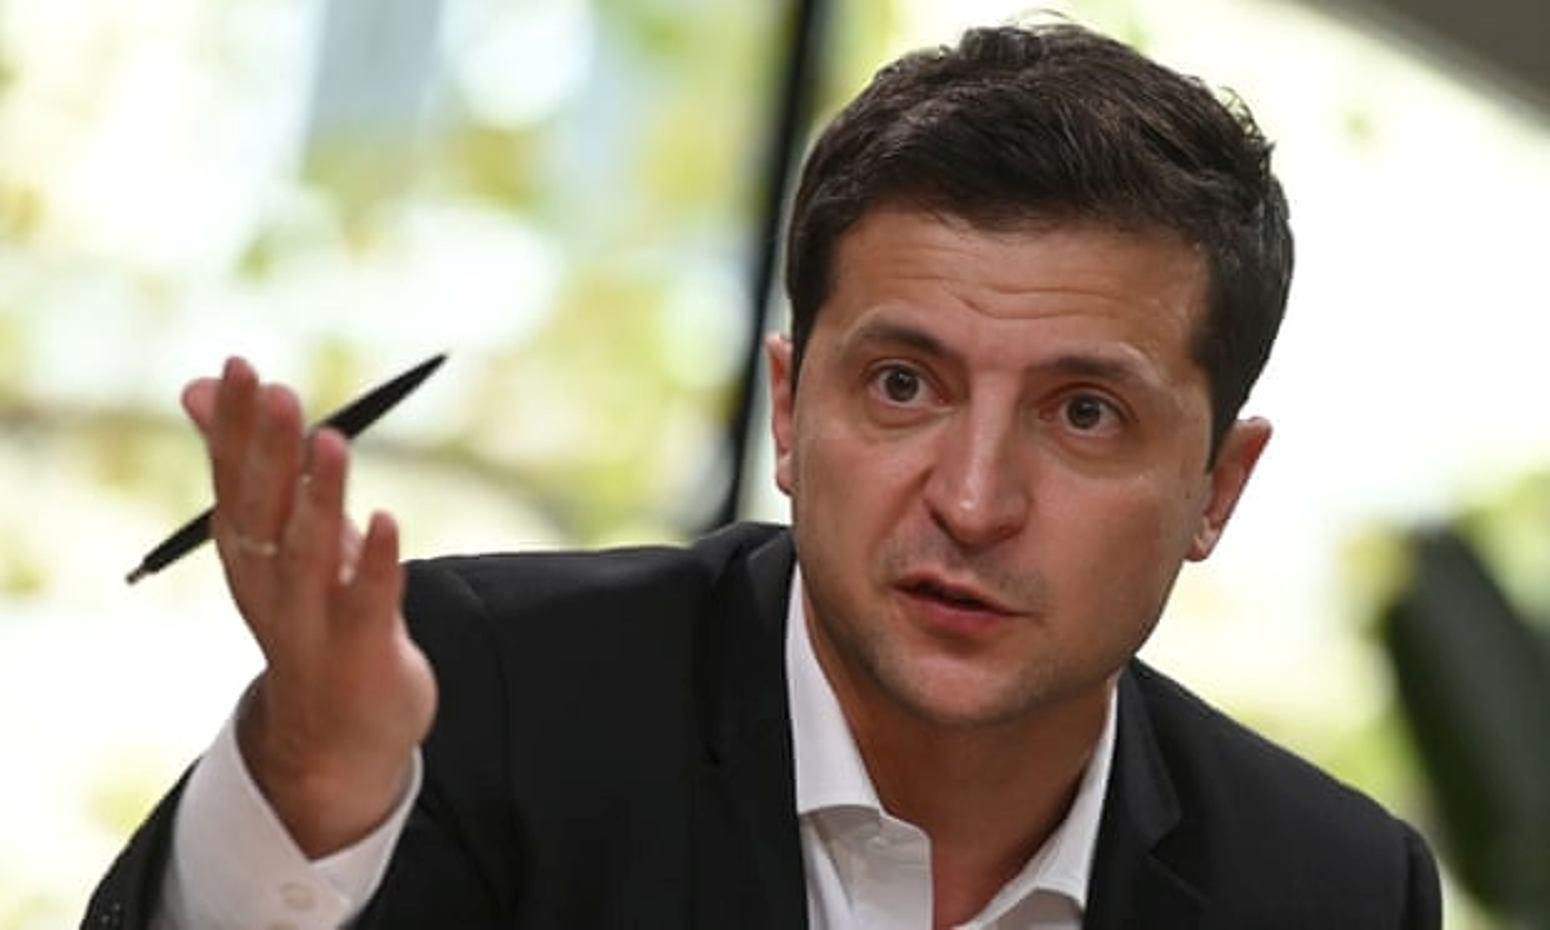 UKRAINE: President Zelensky, aide isolated after COVID-19 diagnosis